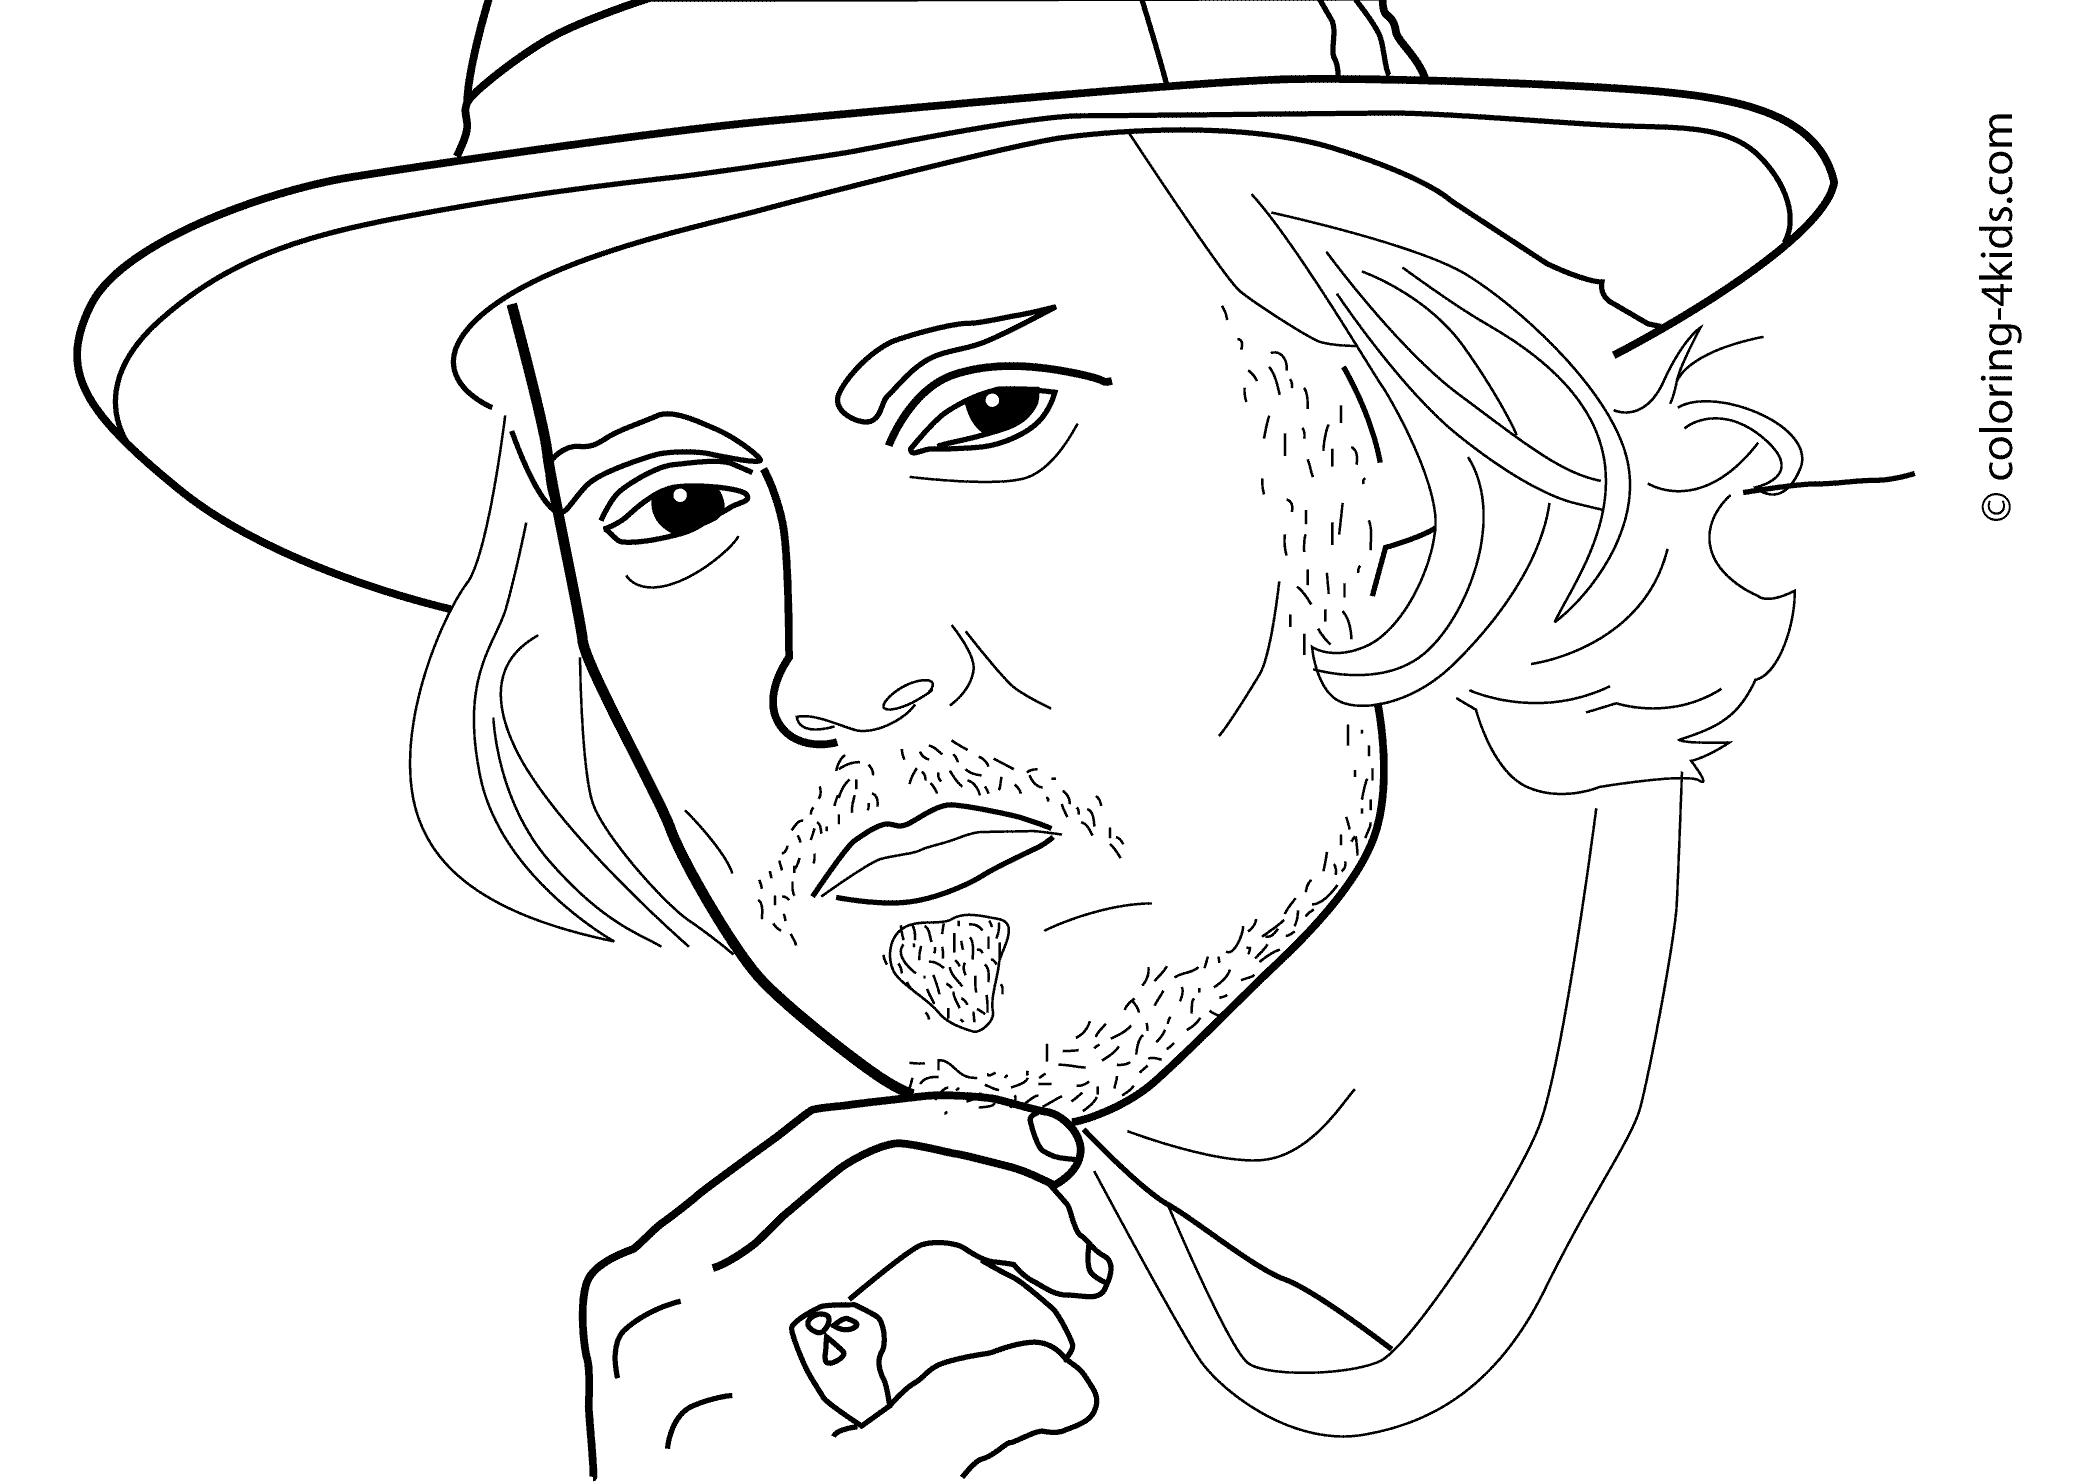 Download Johnny Depp #123658 (Celebrities) - Printable coloring pages